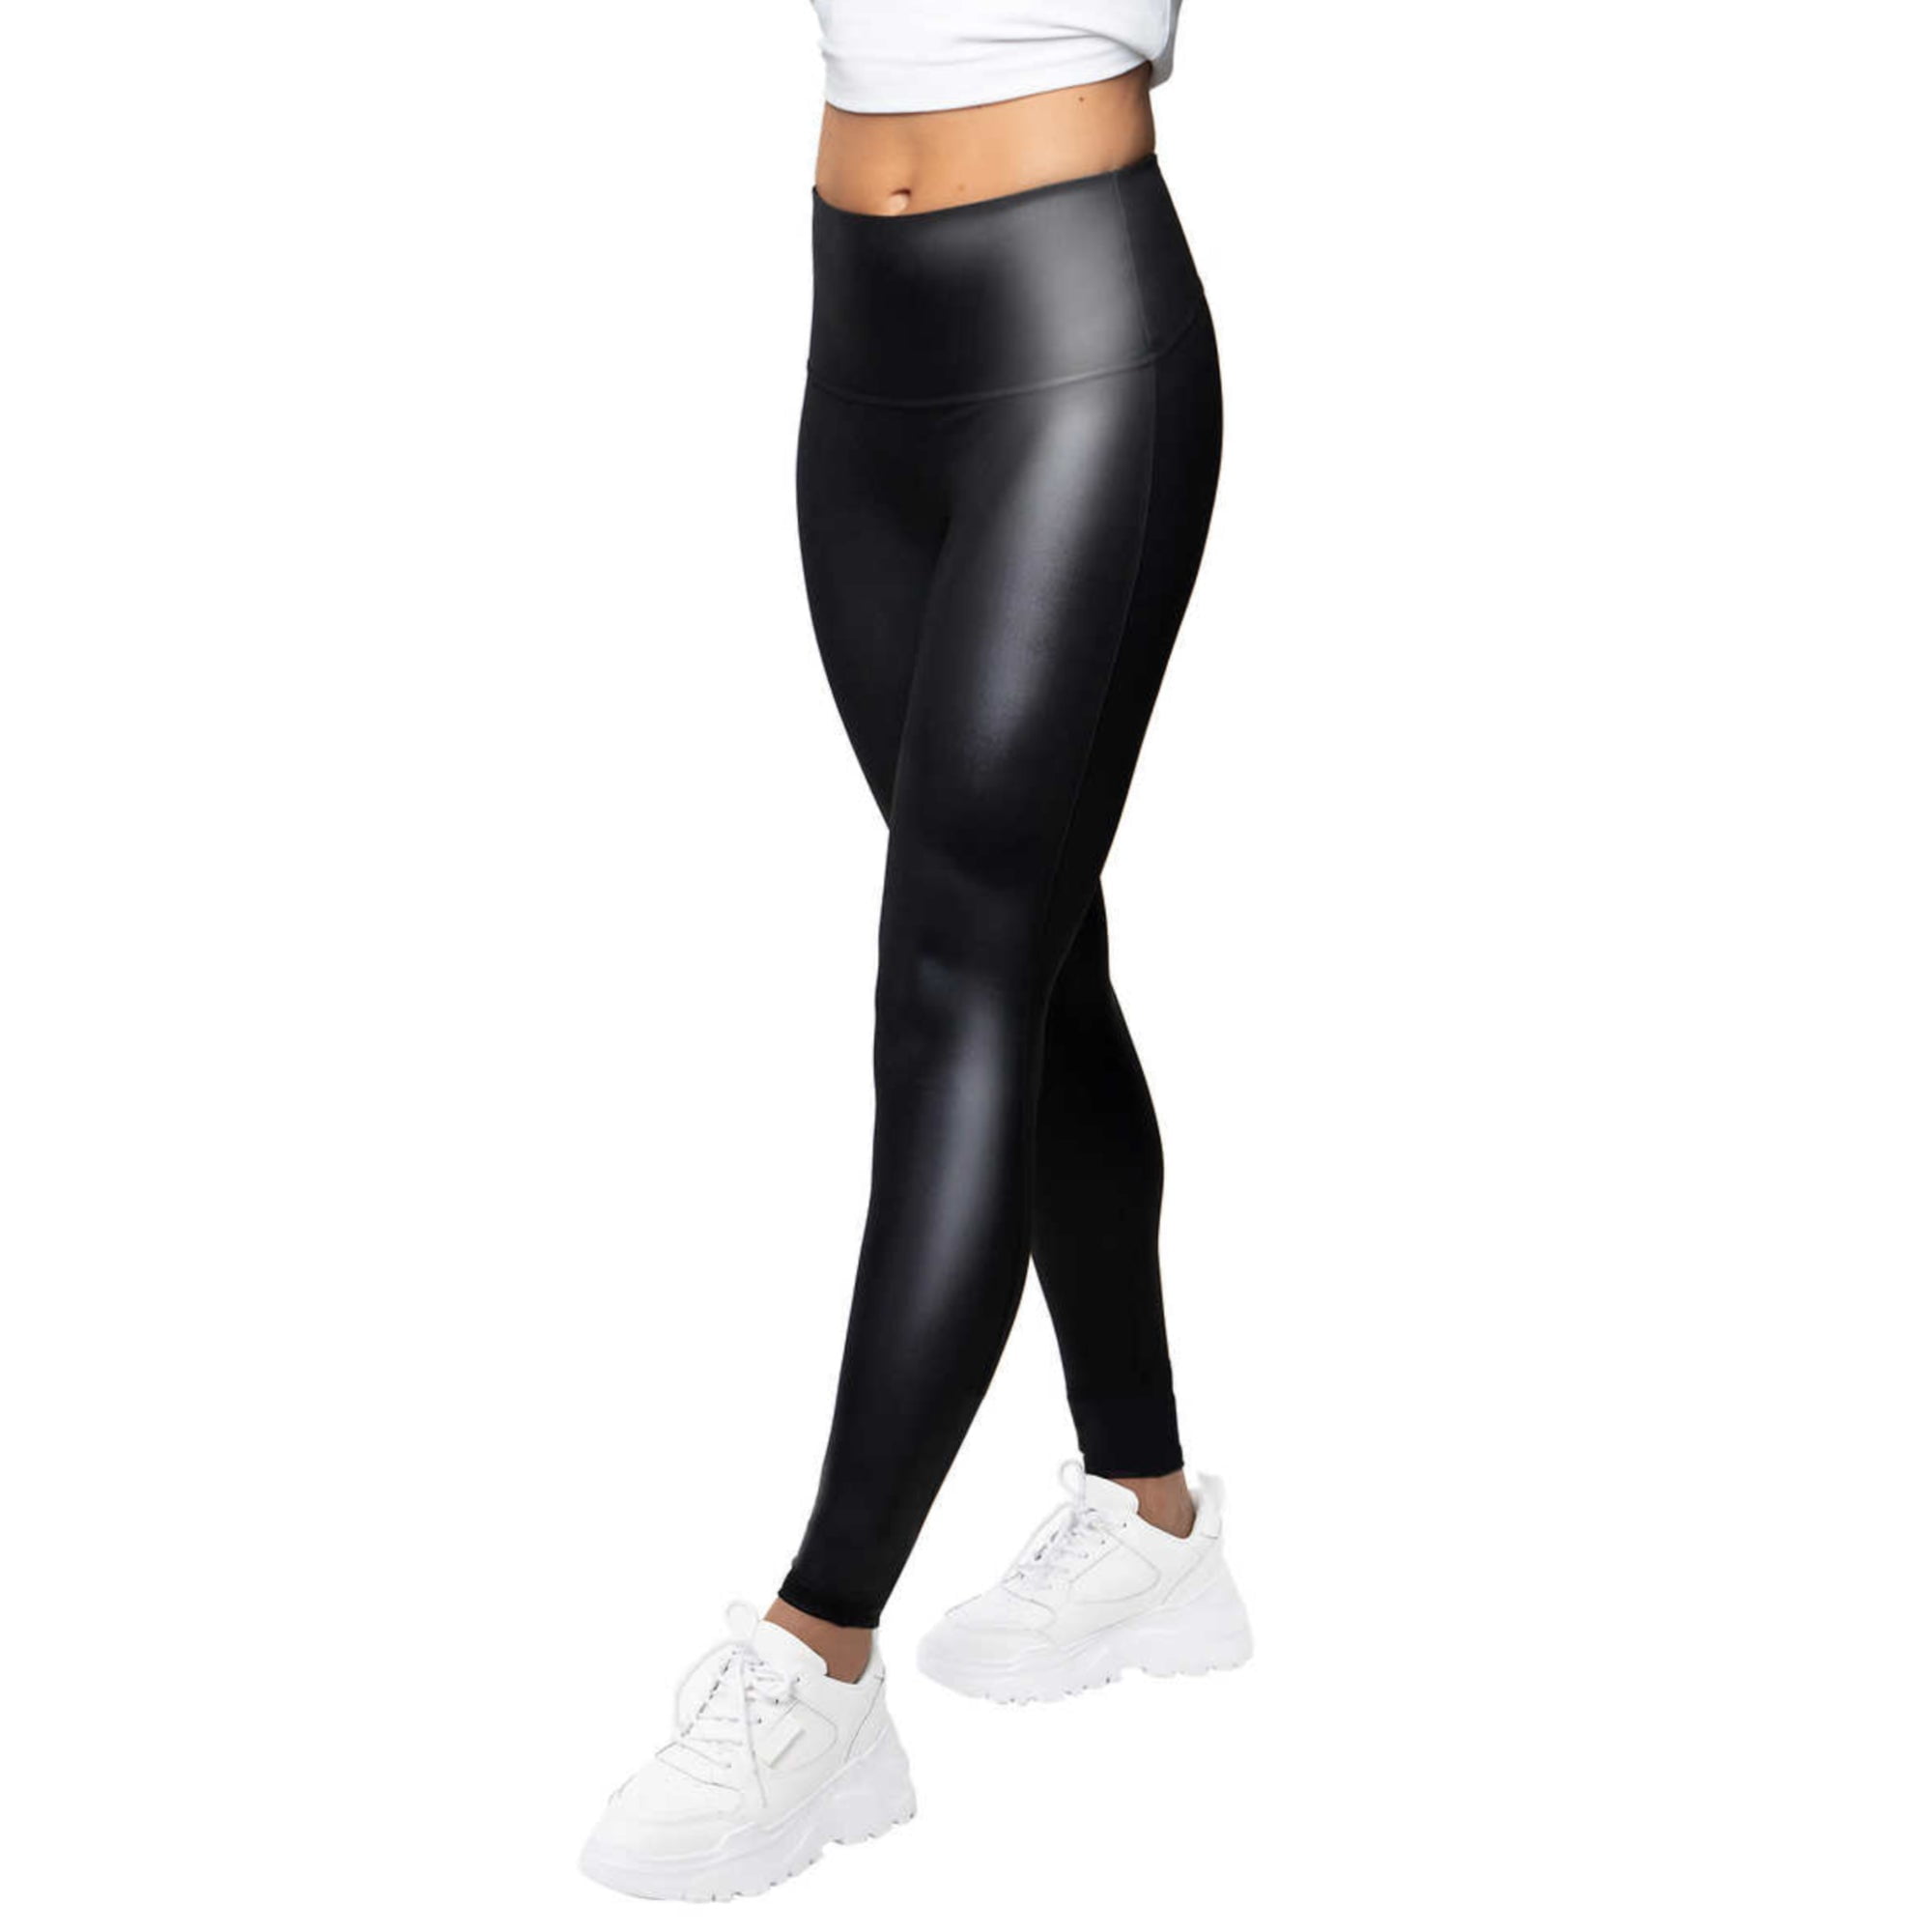 Jane and Bleecker Women's High Rise Soft Faux Leather Leggings-Black ...